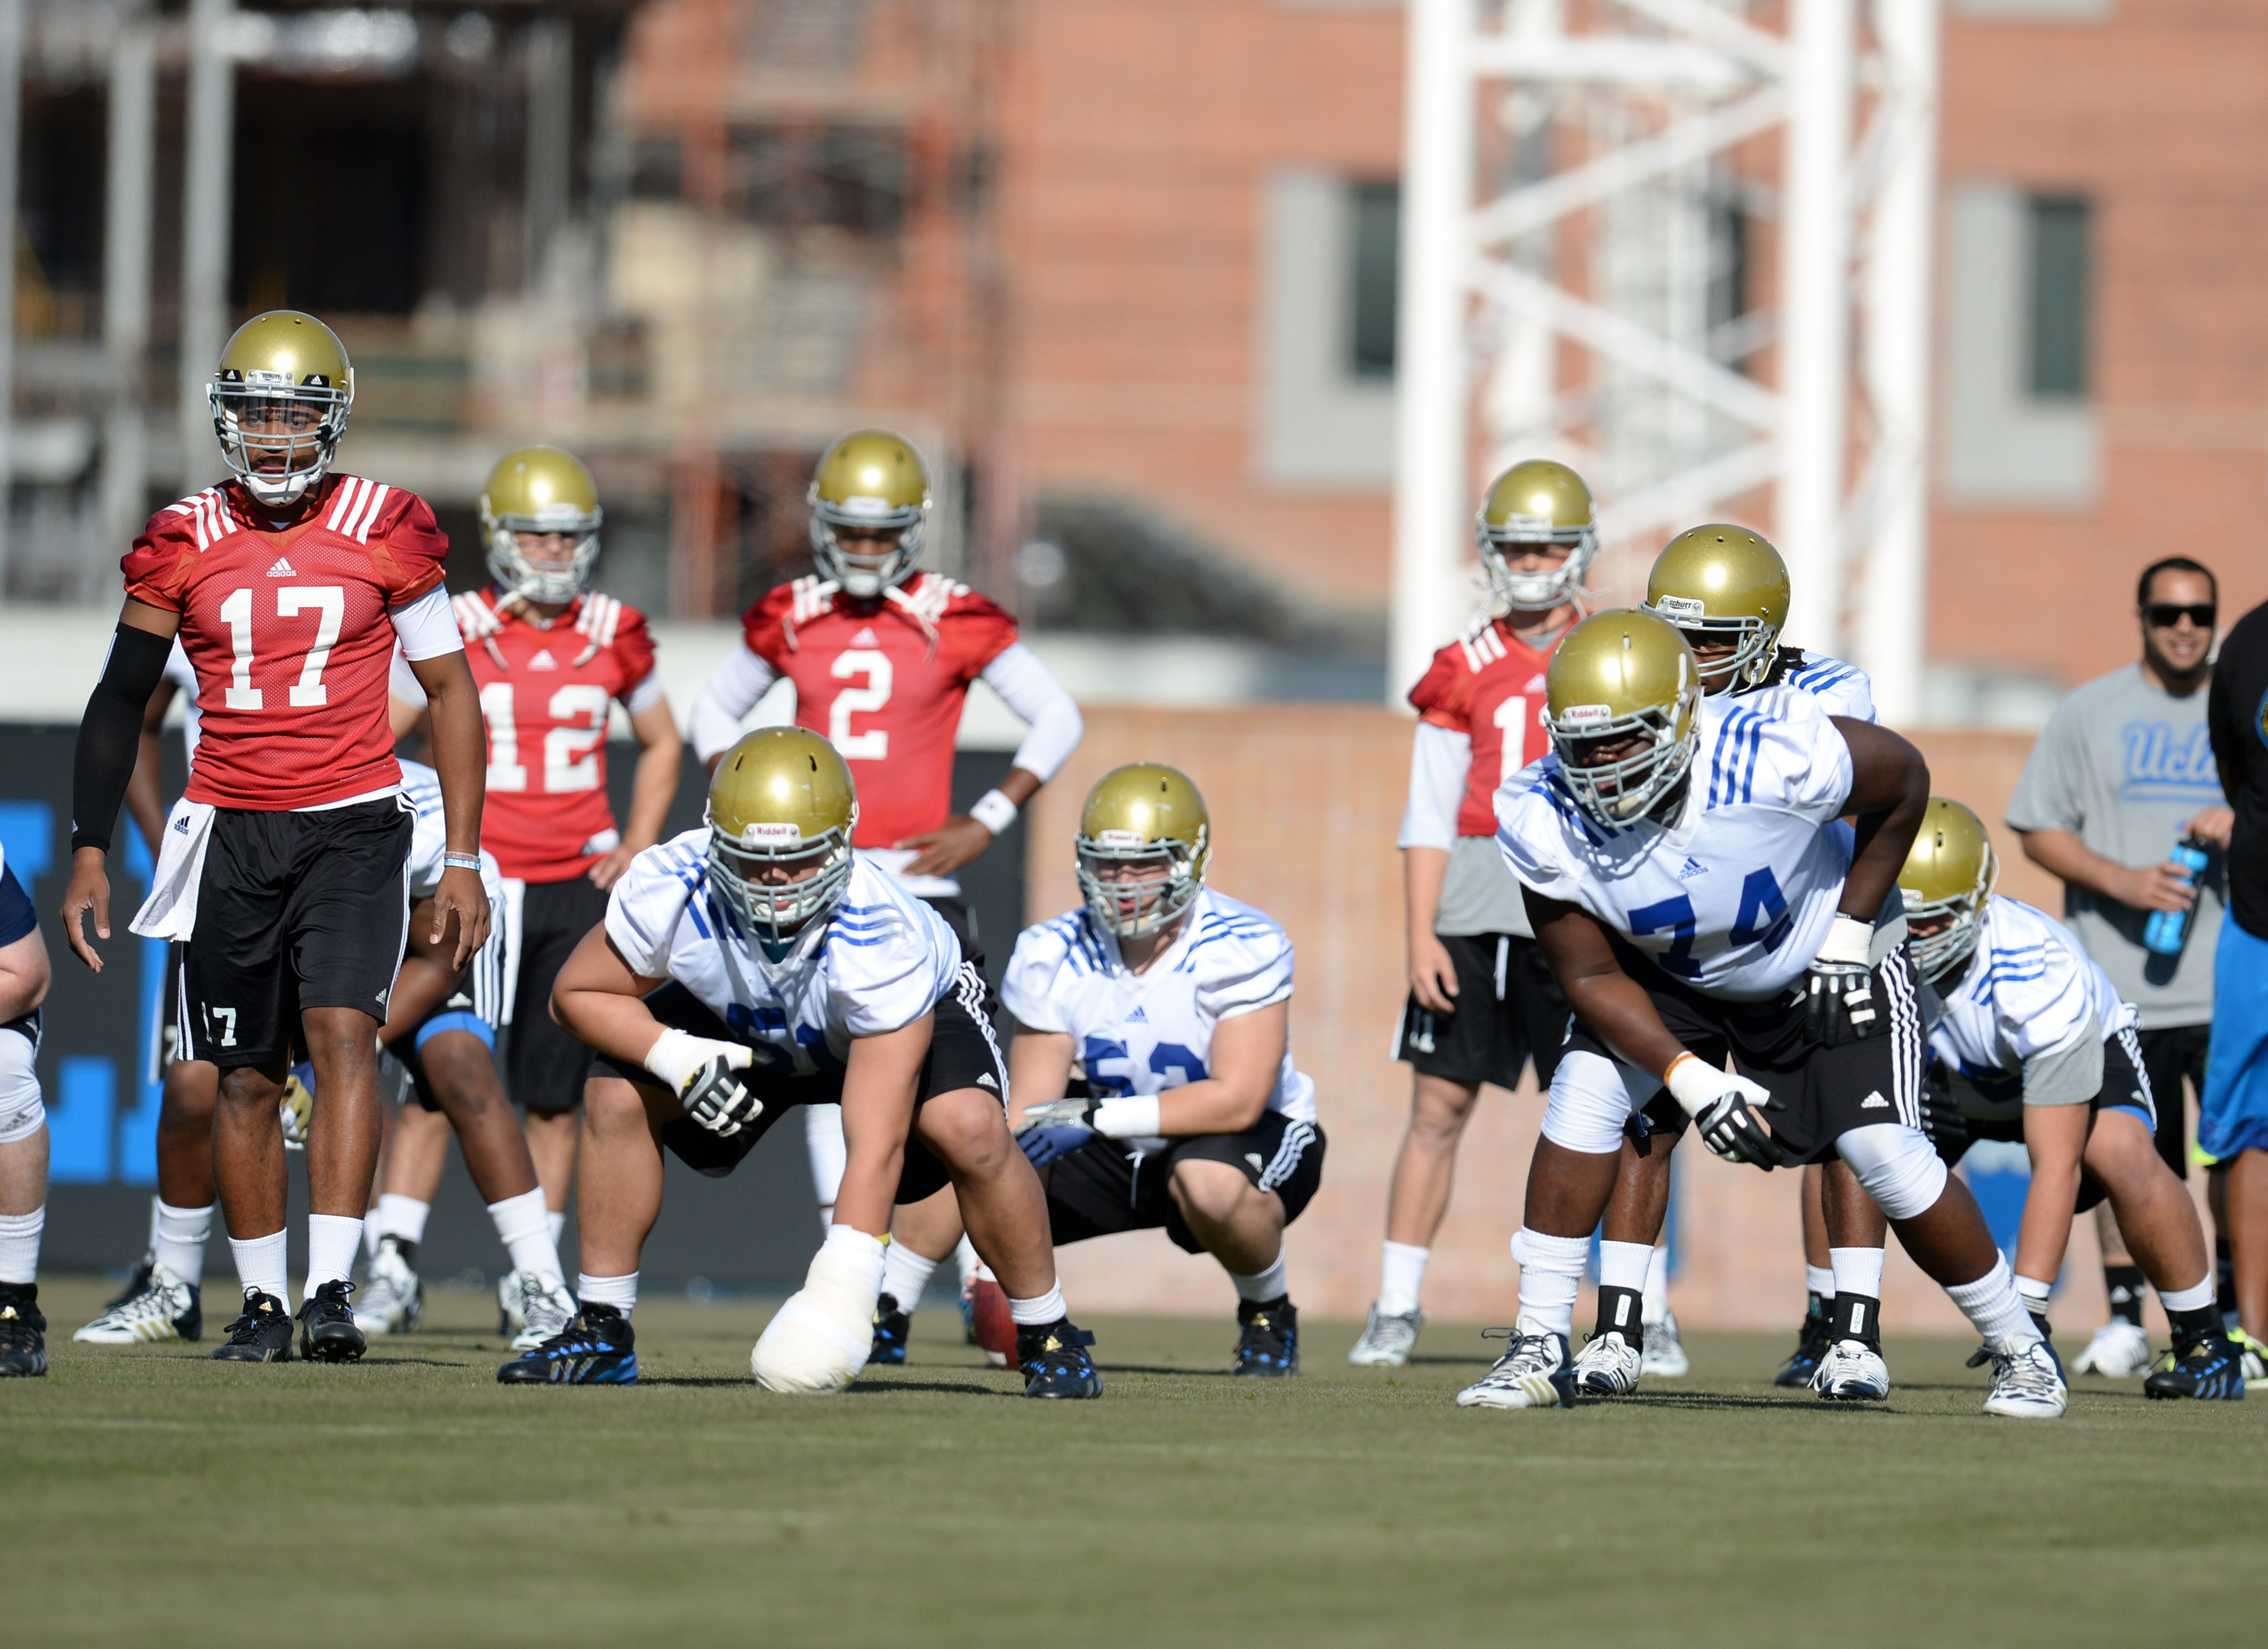 Brett Hundley (17) leads UCLA in a spring practice on April 3, 2014. With the quarterback now off the the NFL, the Bruins will spend this spring trying to find his successor. (Hans Gutknecht/Staff)